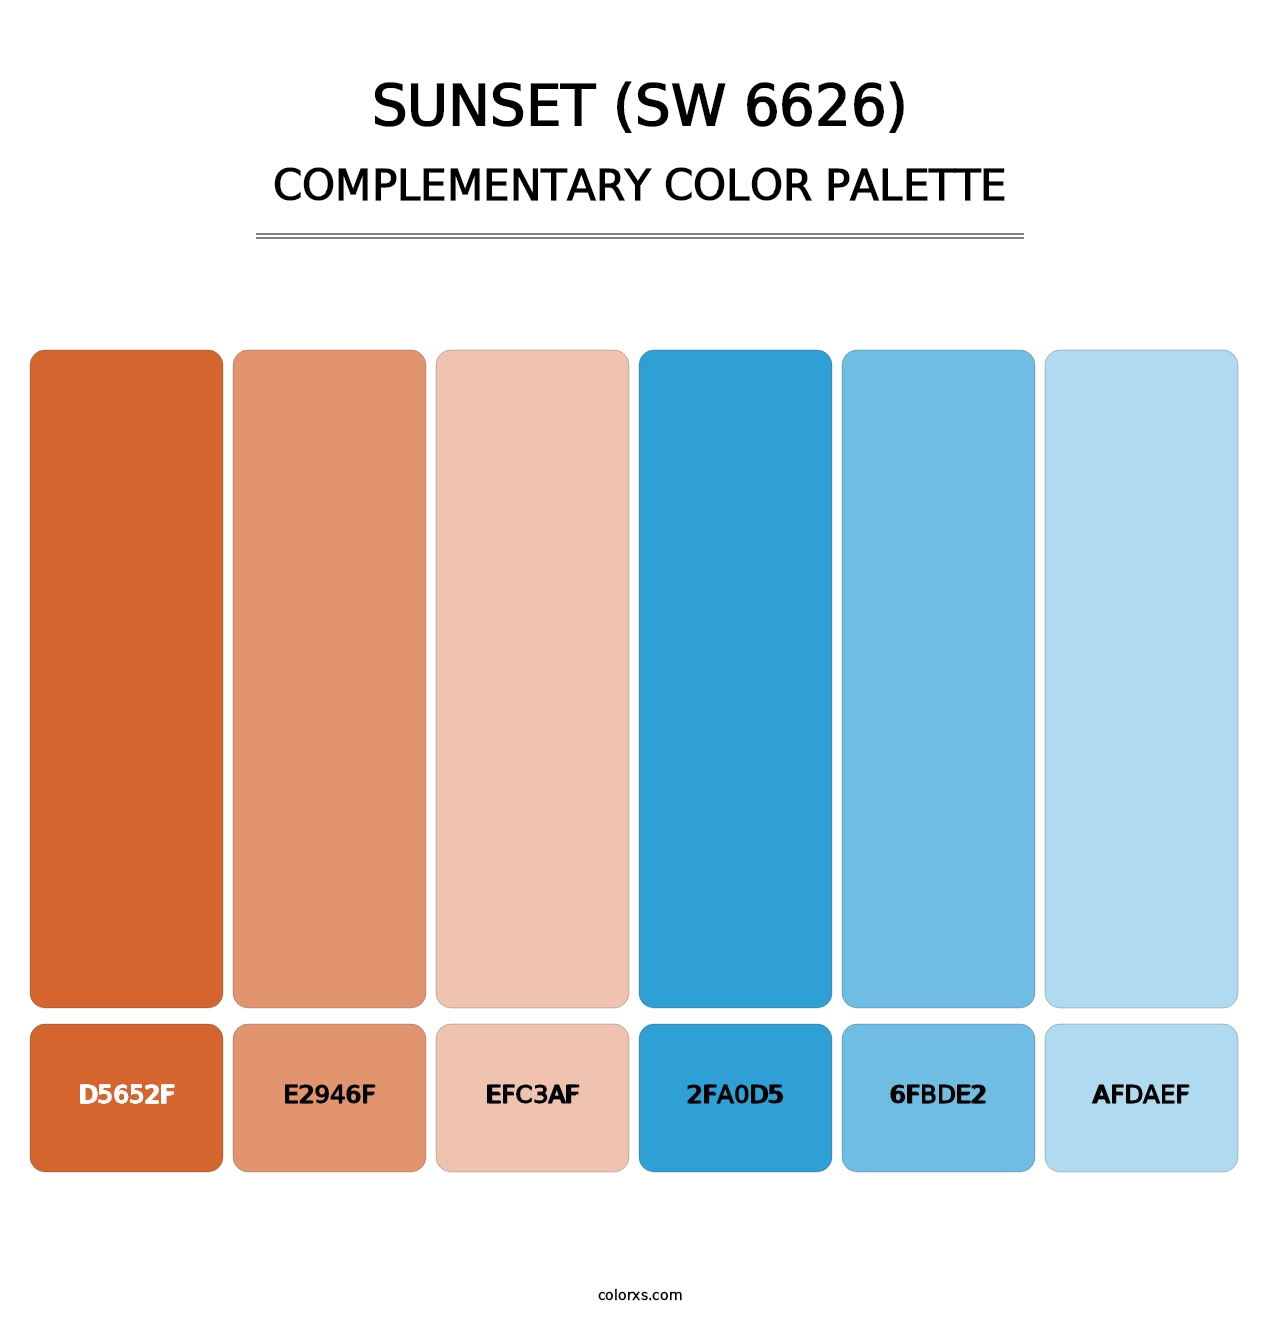 Sunset (SW 6626) - Complementary Color Palette